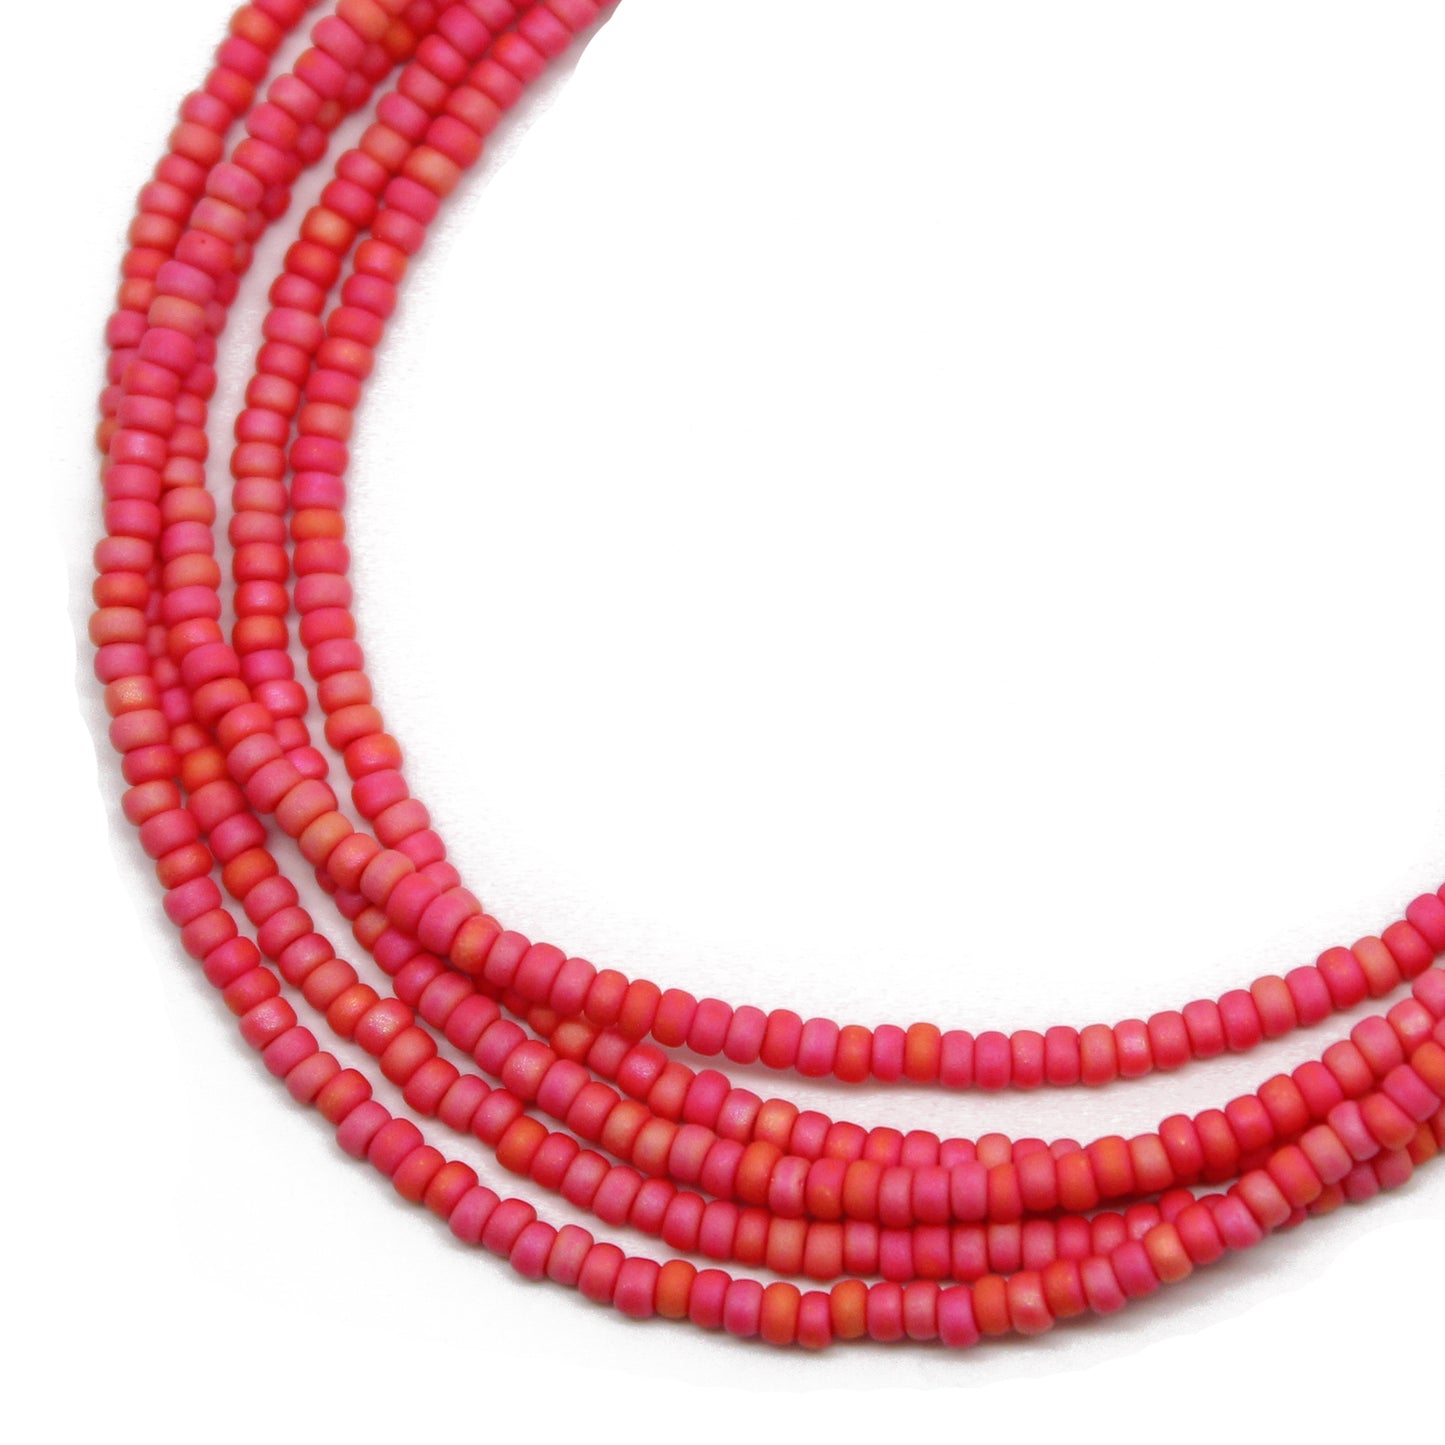 Coral Rainbow Seed Bead Necklace, Thin 1.5mm Single Strand Beaded Necklace